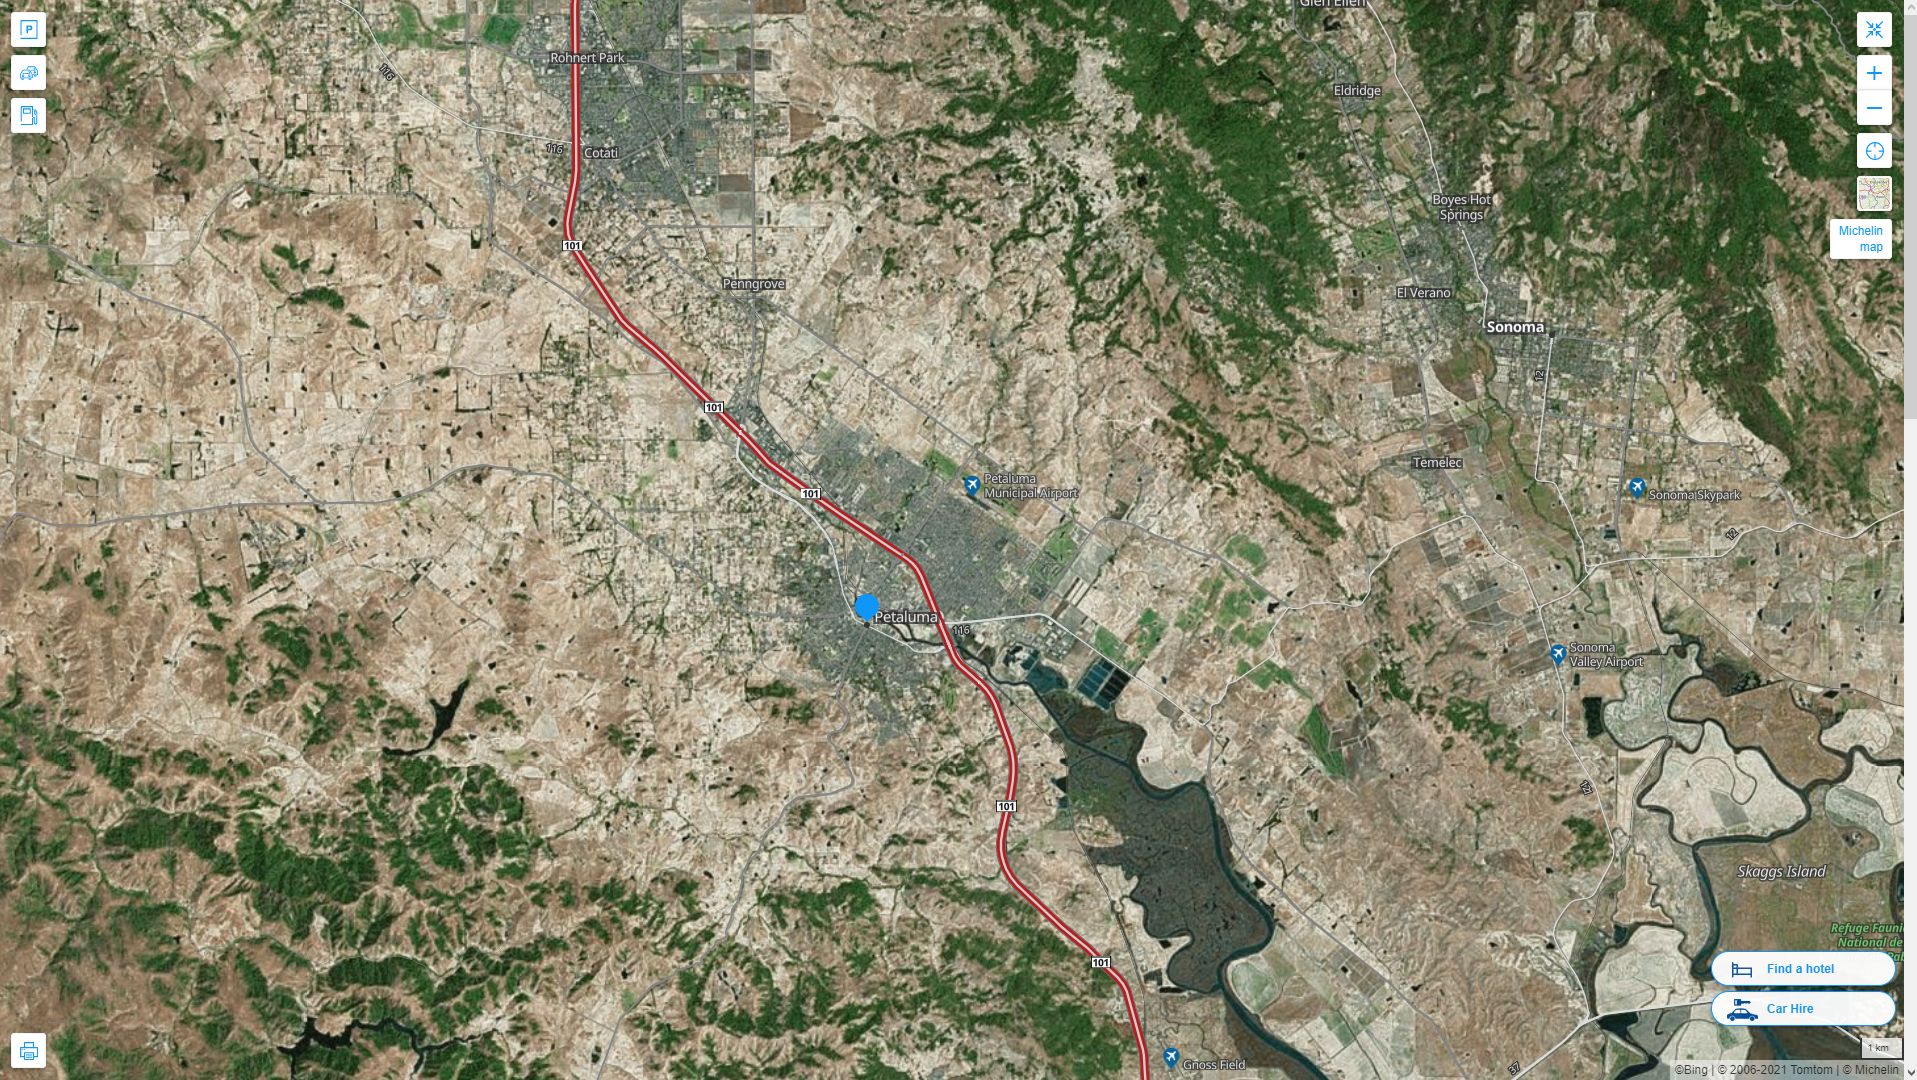 Petaluma California Highway and Road Map with Satellite View